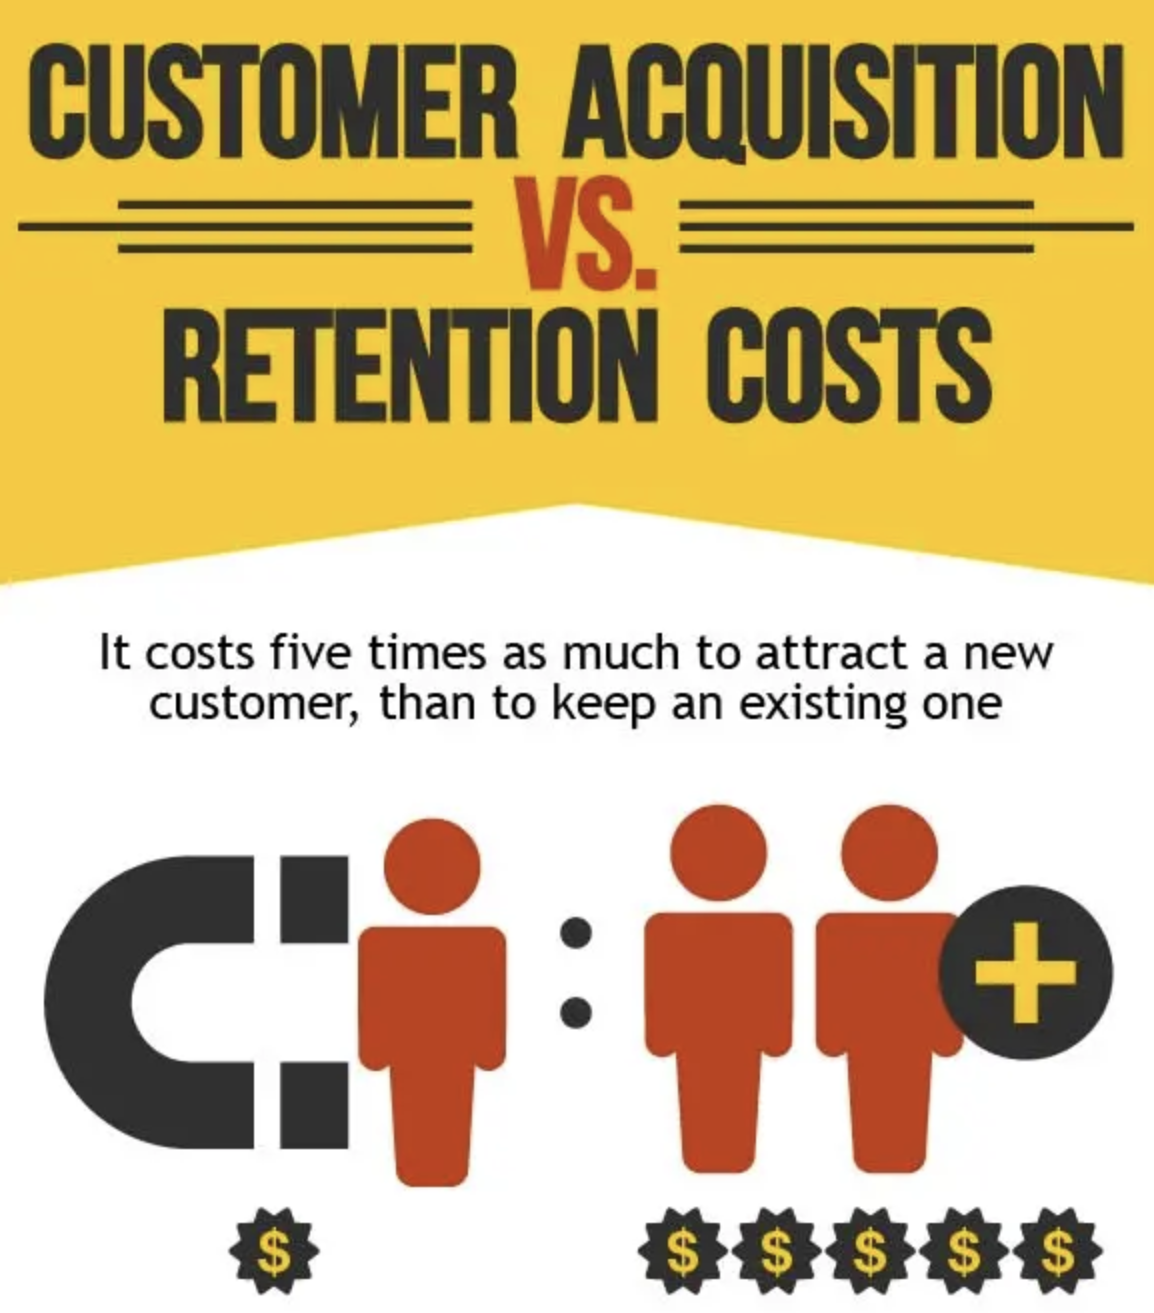  Comparative costs of acquisition and retention